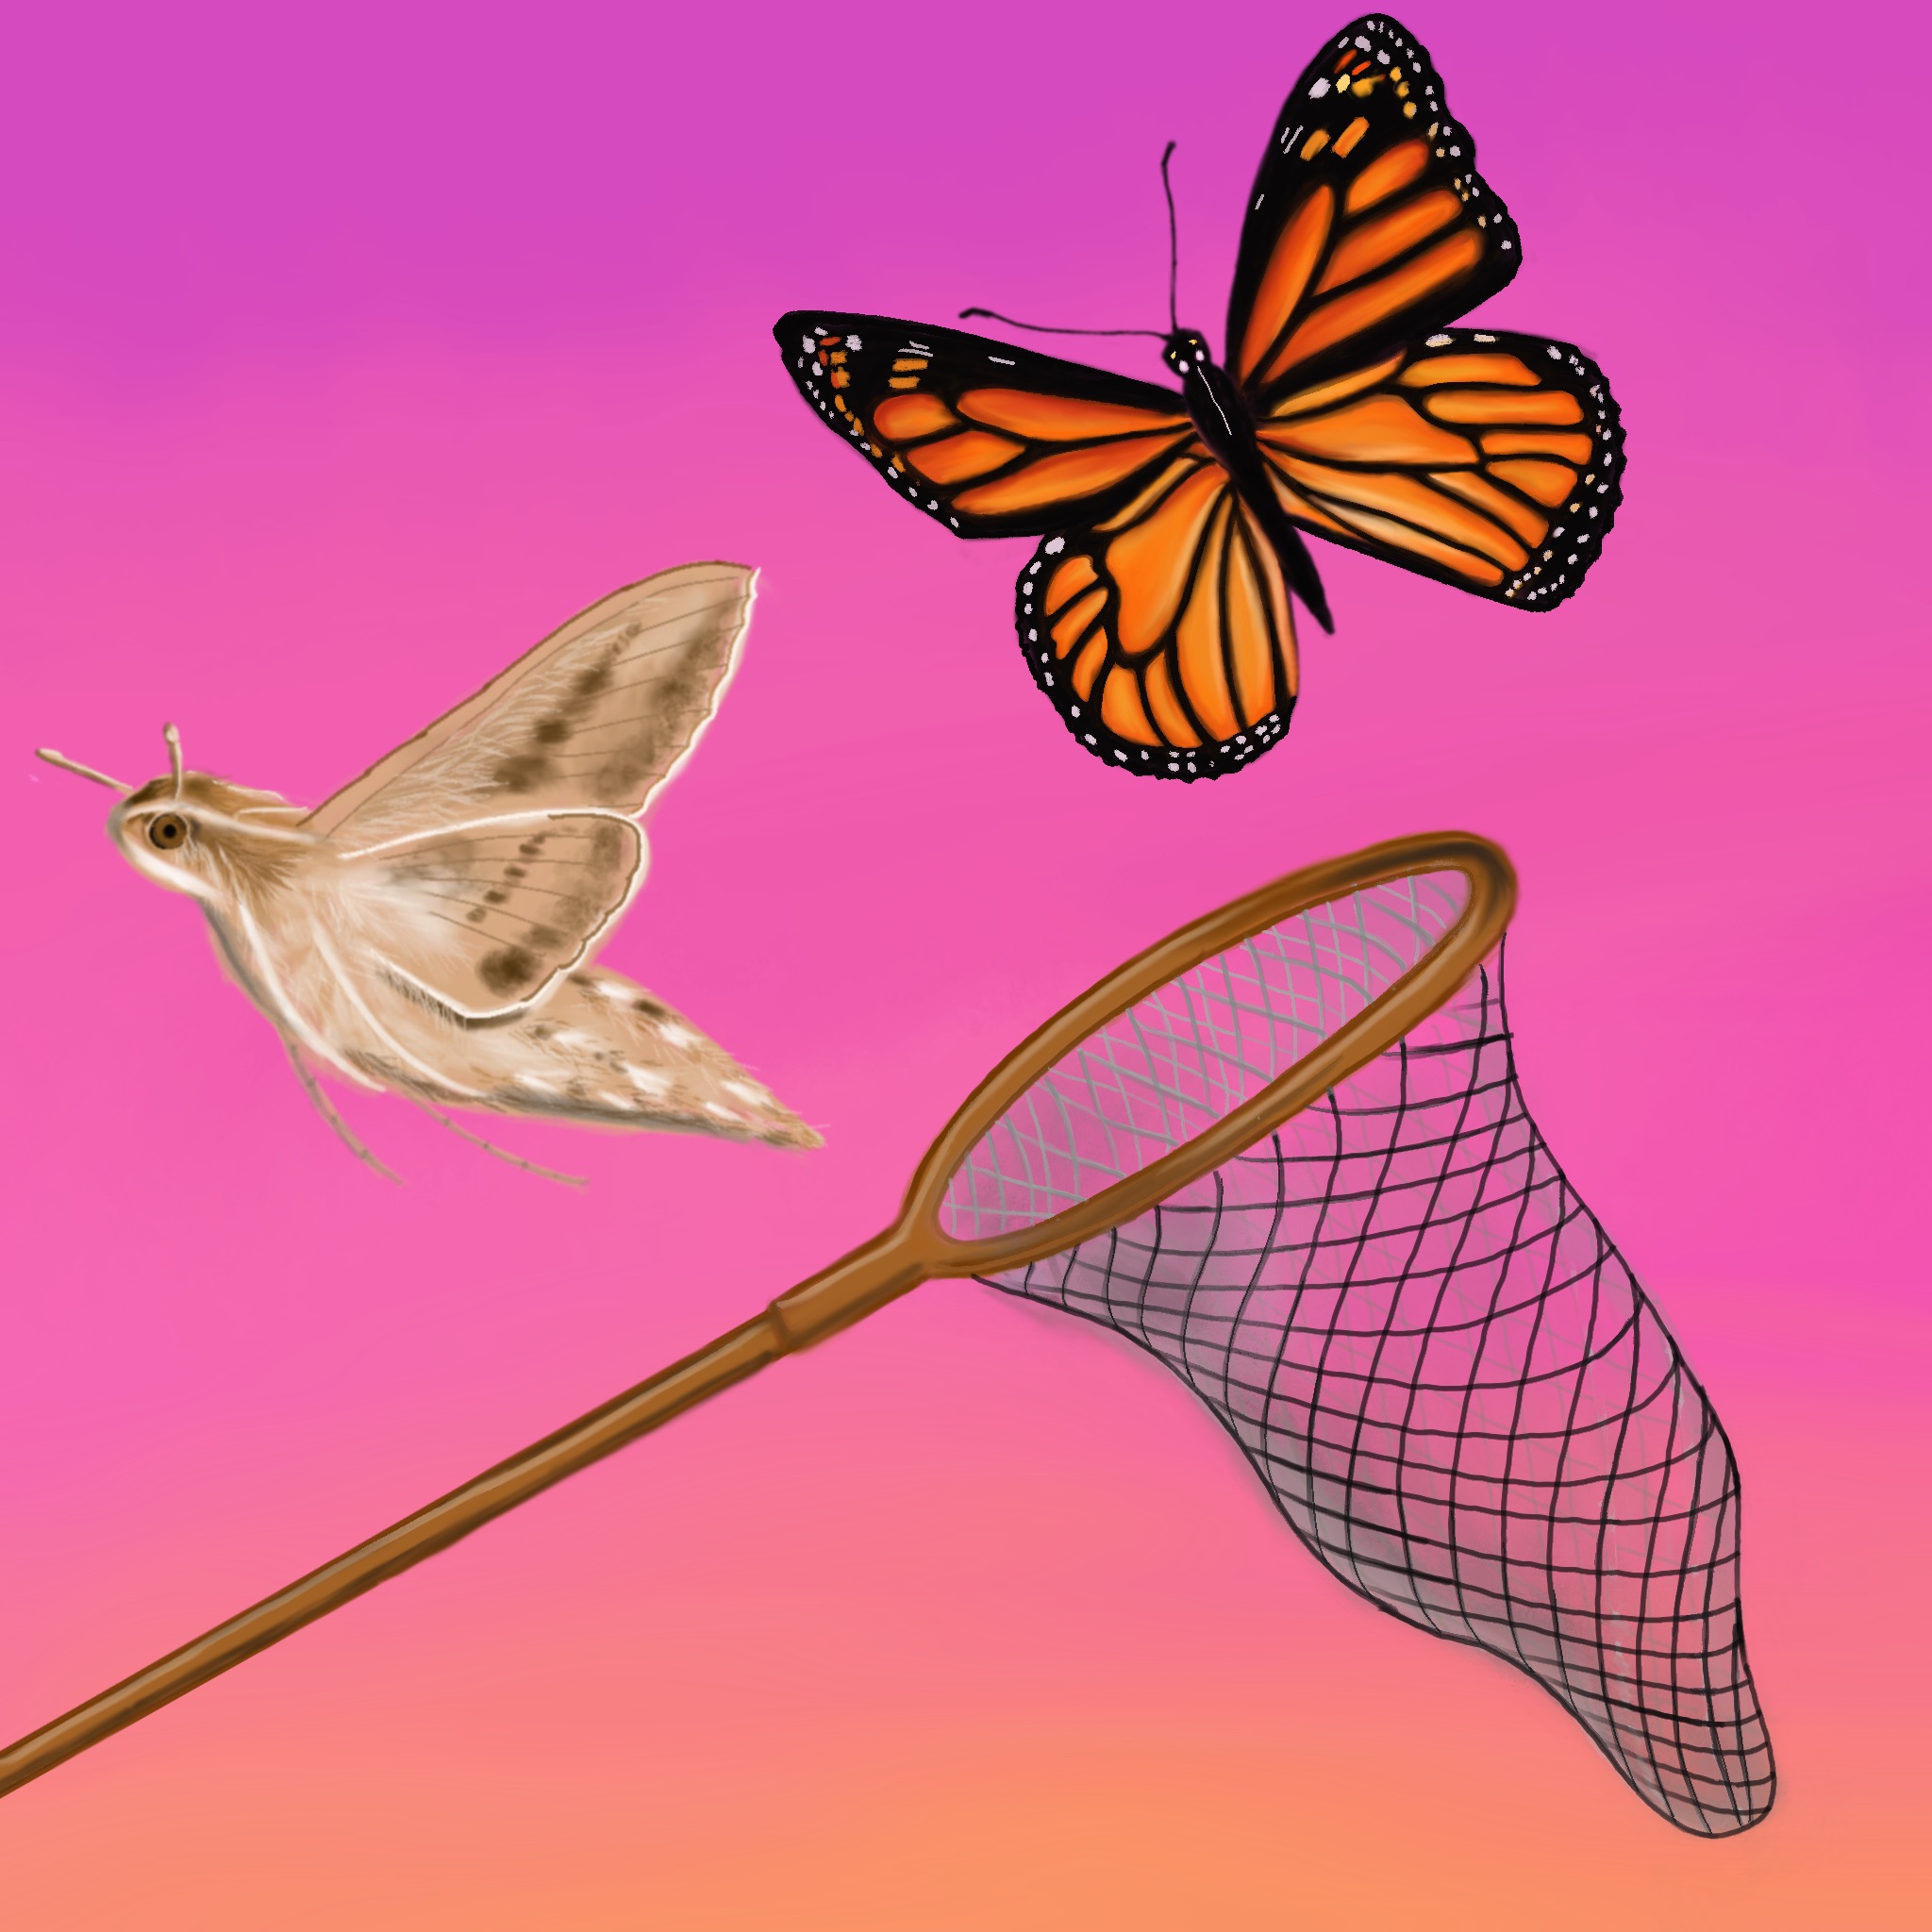 an illustration of a moth and butterfly dodging a net